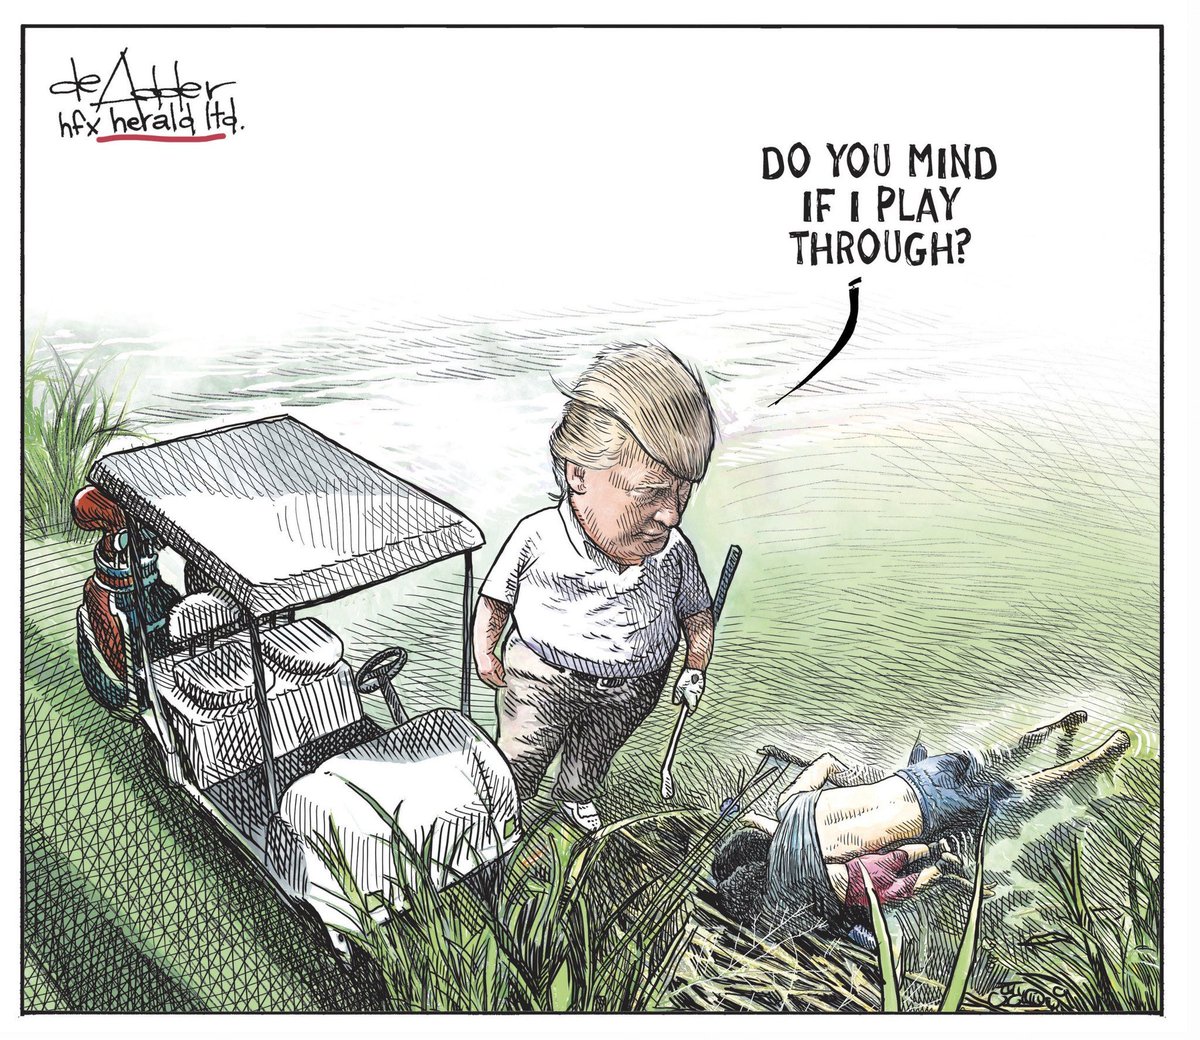 This went viral and created controversy for  @deAdder